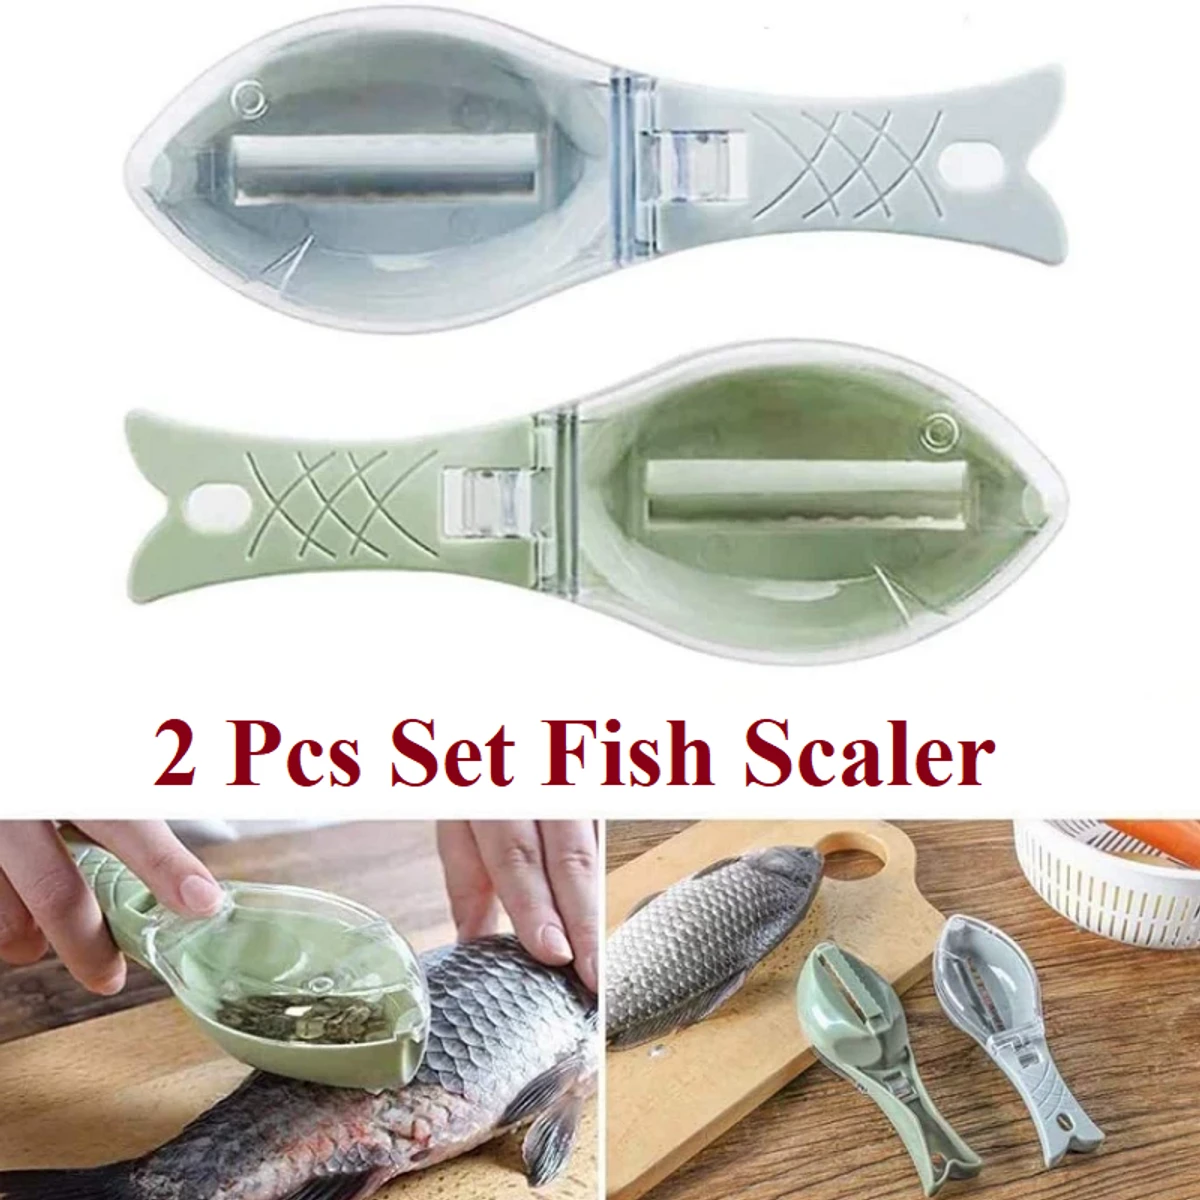 2 pcs Set Fish Scale Remover Cleaner Kitchen Fish Scaler